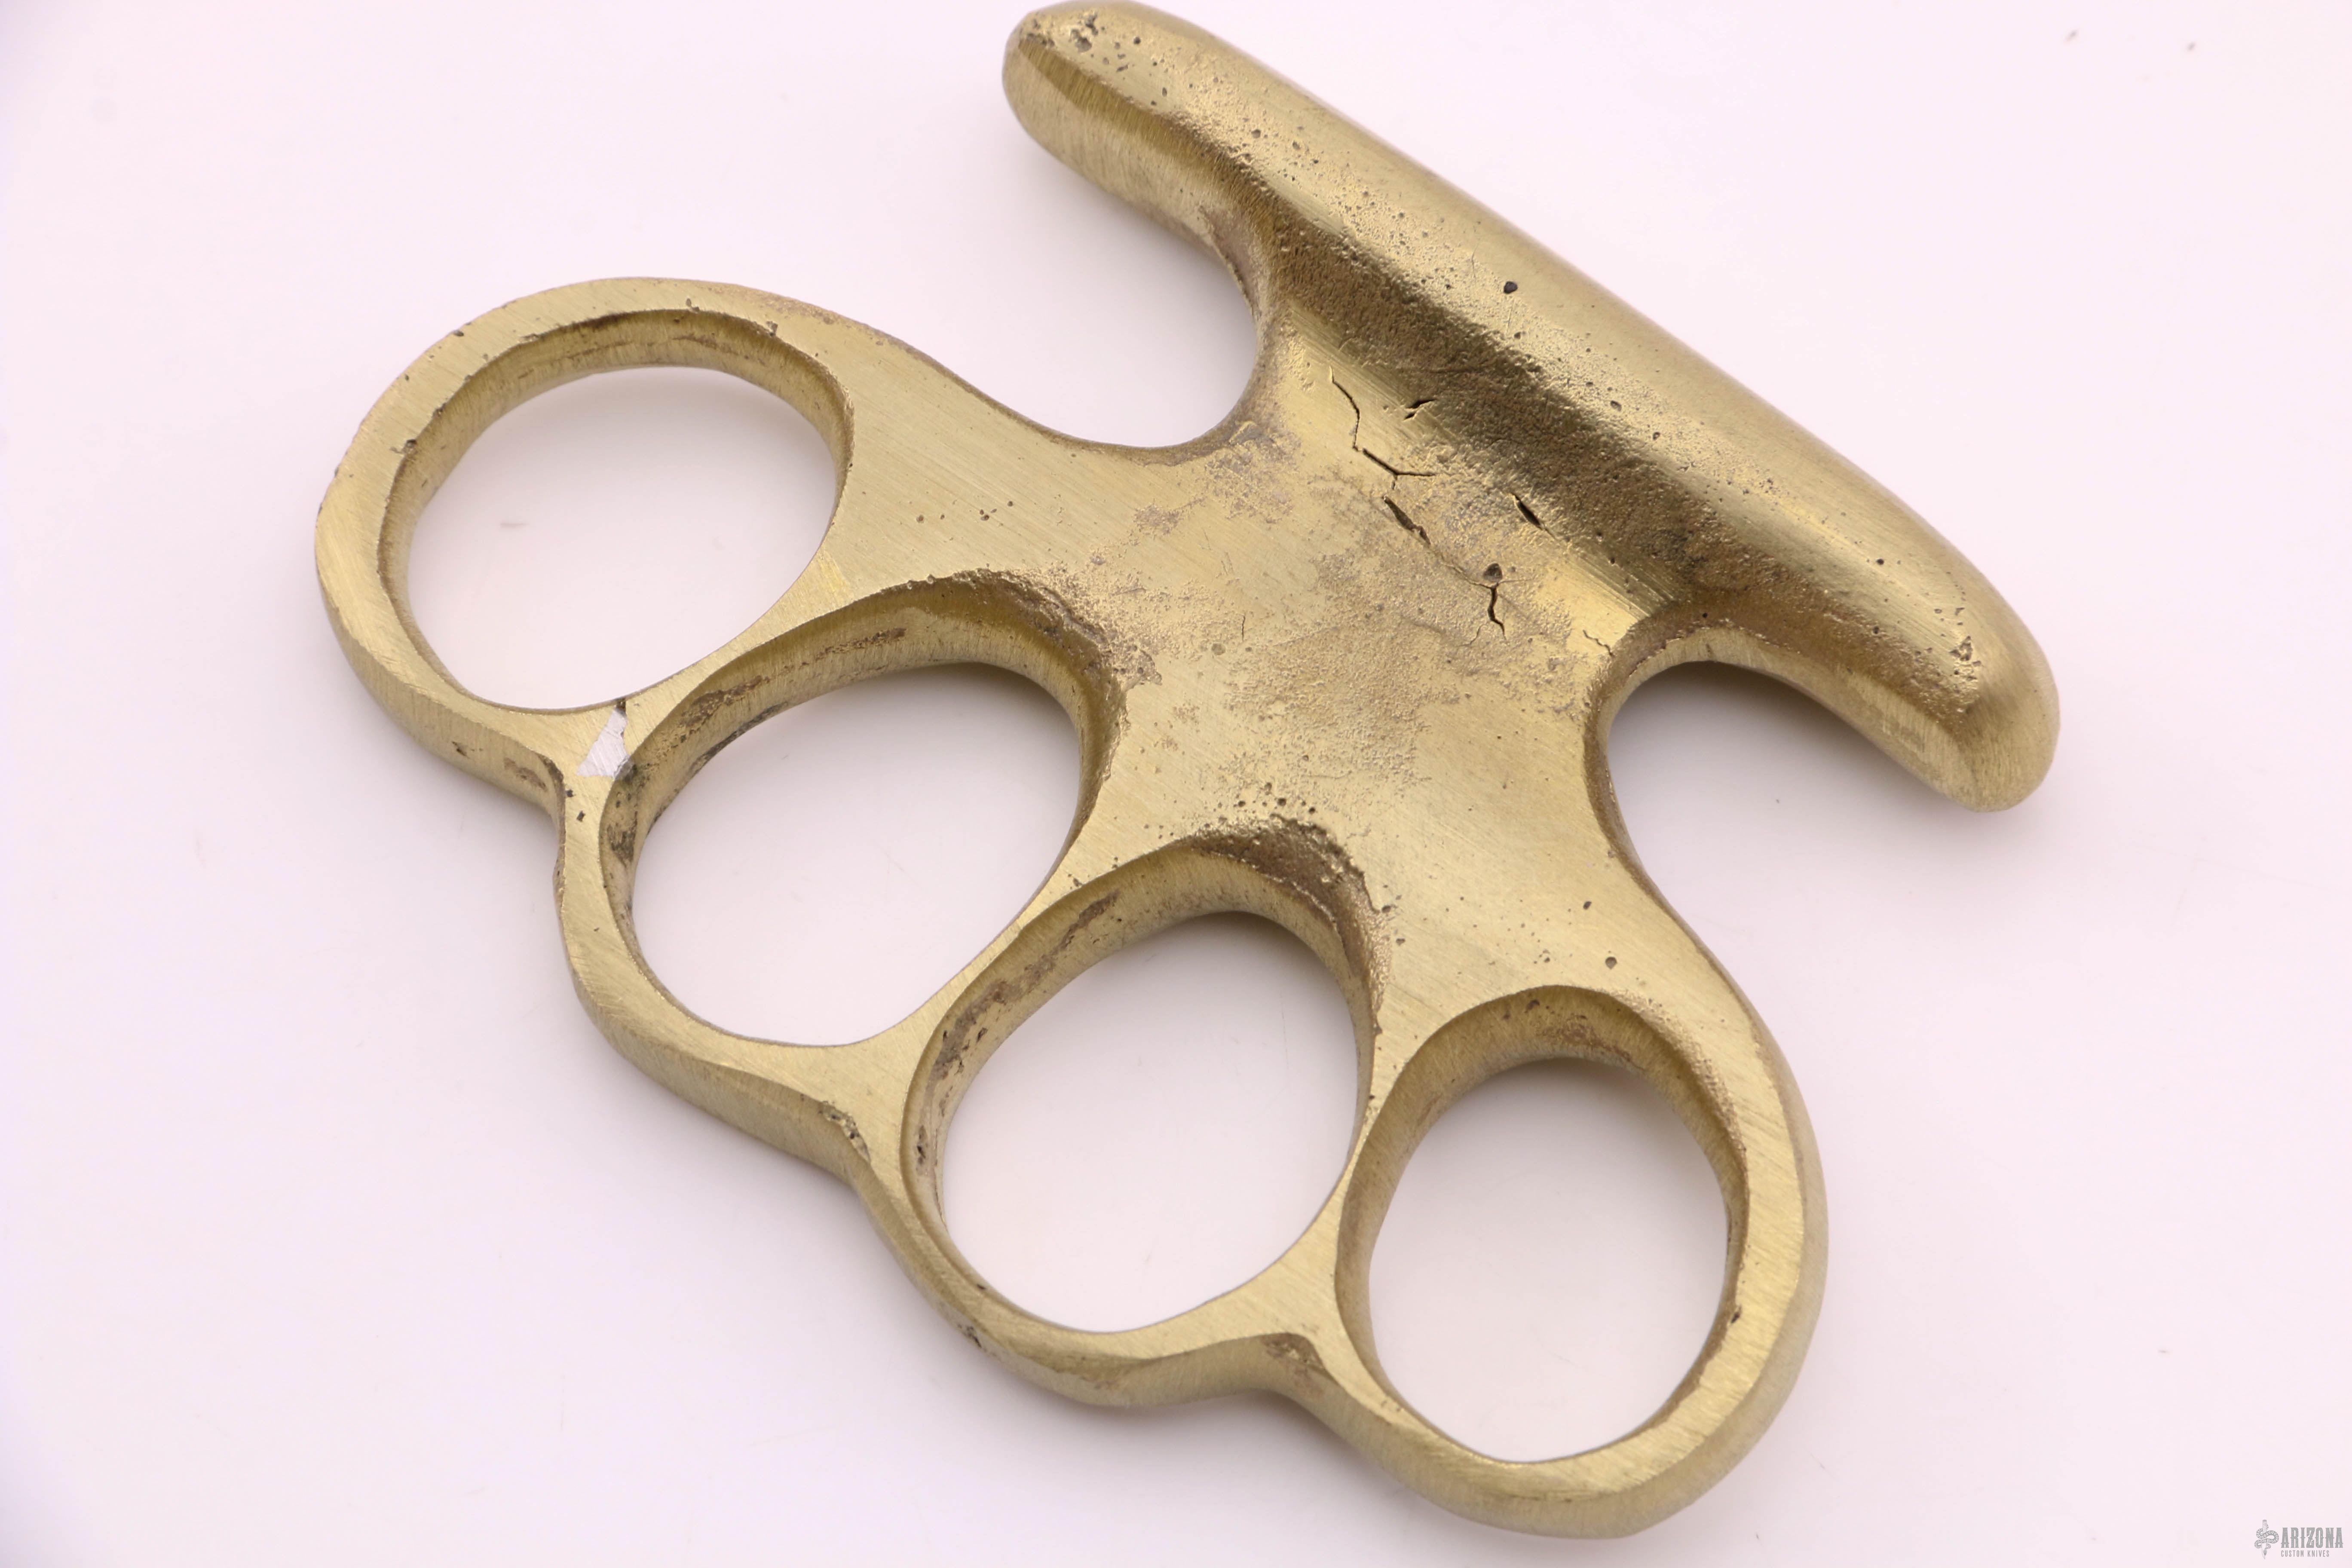 Construction of Brass Knuckles with Different Materials:, by Ashlybrine